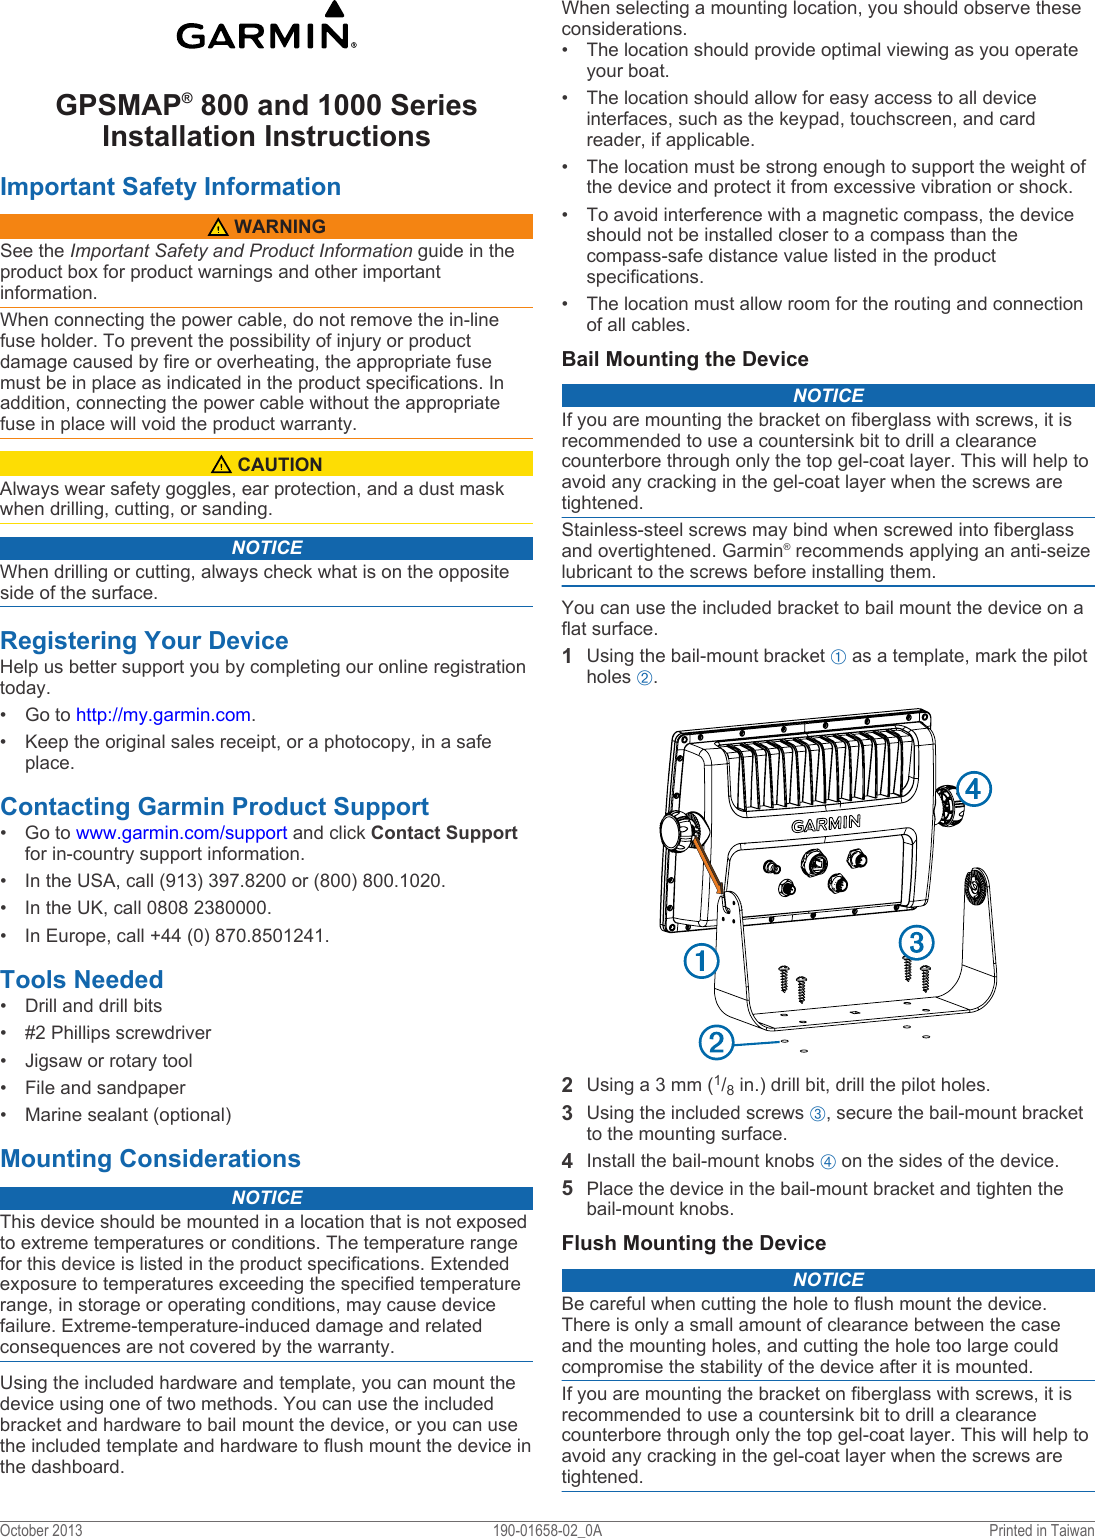 GPSMAP® 800 and 1000 Series Installation Instructions Important Safety Information WARNINGSee the Important Safety and Product Information guide in the product box for product warnings and other important information.When connecting the power cable, do not remove the in-line fuse holder. To prevent the possibility of injury or product damage caused by fire or overheating, the appropriate fuse must be in place as indicated in the product specifications. In addition, connecting the power cable without the appropriate fuse in place will void the product warranty. CAUTIONAlways wear safety goggles, ear protection, and a dust mask when drilling, cutting, or sanding.NOTICEWhen drilling or cutting, always check what is on the opposite side of the surface.Registering Your DeviceHelp us better support you by completing our online registration today.• Go to http://my.garmin.com.• Keep the original sales receipt, or a photocopy, in a safe place.Contacting Garmin Product Support• Go to www.garmin.com/support and click Contact Support for in-country support information.• In the USA, call (913) 397.8200 or (800) 800.1020.• In the UK, call 0808 2380000.• In Europe, call +44 (0) 870.8501241.Tools Needed• Drill and drill bits• #2 Phillips screwdriver• Jigsaw or rotary tool• File and sandpaper• Marine sealant (optional)Mounting ConsiderationsNOTICEThis device should be mounted in a location that is not exposed to extreme temperatures or conditions. The temperature range for this device is listed in the product specifications. Extended exposure to temperatures exceeding the specified temperature range, in storage or operating conditions, may cause device failure. Extreme-temperature-induced damage and related consequences are not covered by the warranty.Using the included hardware and template, you can mount the device using one of two methods. You can use the included bracket and hardware to bail mount the device, or you can use the included template and hardware to flush mount the device in the dashboard.When selecting a mounting location, you should observe these considerations.• The location should provide optimal viewing as you operate your boat.• The location should allow for easy access to all device interfaces, such as the keypad, touchscreen, and card reader, if applicable.• The location must be strong enough to support the weight of the device and protect it from excessive vibration or shock.• To avoid interference with a magnetic compass, the device should not be installed closer to a compass than the compass-safe distance value listed in the product specifications.• The location must allow room for the routing and connection of all cables.Bail Mounting the DeviceNOTICEIf you are mounting the bracket on fiberglass with screws, it is recommended to use a countersink bit to drill a clearance counterbore through only the top gel-coat layer. This will help to avoid any cracking in the gel-coat layer when the screws are tightened.Stainless-steel screws may bind when screwed into fiberglass and overtightened. Garmin® recommends applying an anti-seize lubricant to the screws before installing them.You can use the included bracket to bail mount the device on a flat surface.1Using the bail-mount bracket À as a template, mark the pilot holes Á.2Using a 3 mm (1/8 in.) drill bit, drill the pilot holes.3Using the included screws Â, secure the bail-mount bracket to the mounting surface.4Install the bail-mount knobs Ã on the sides of the device.5Place the device in the bail-mount bracket and tighten the bail-mount knobs.Flush Mounting the DeviceNOTICEBe careful when cutting the hole to flush mount the device. There is only a small amount of clearance between the case and the mounting holes, and cutting the hole too large could compromise the stability of the device after it is mounted.If you are mounting the bracket on fiberglass with screws, it is recommended to use a countersink bit to drill a clearance counterbore through only the top gel-coat layer. This will help to avoid any cracking in the gel-coat layer when the screws are tightened.October 2013 190-01658-02_0A Printed in Taiwan